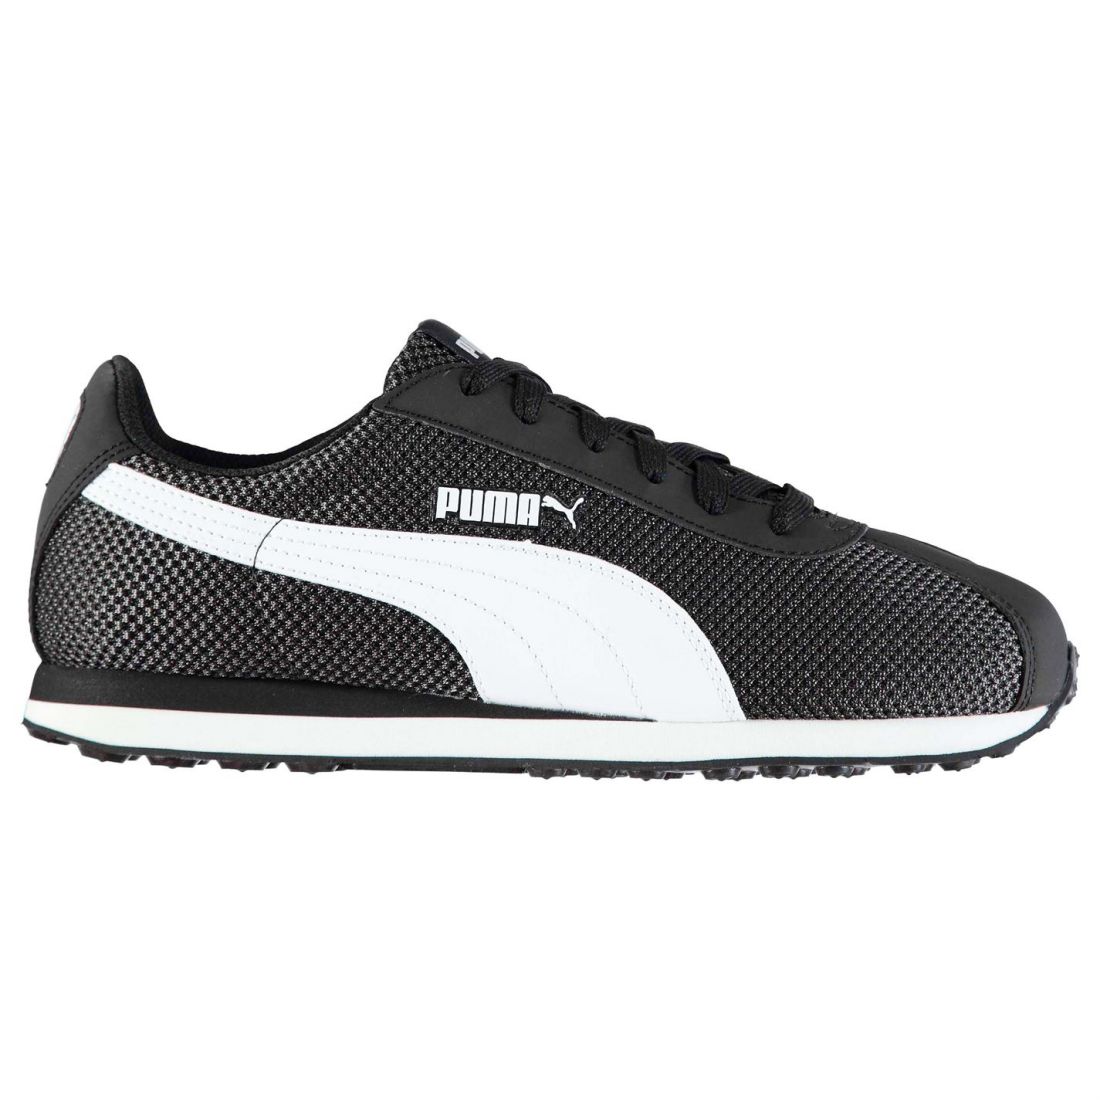 Puma Mens Turin Mesh Trainers Runners Lace Up Shoes Textile Breathable ...